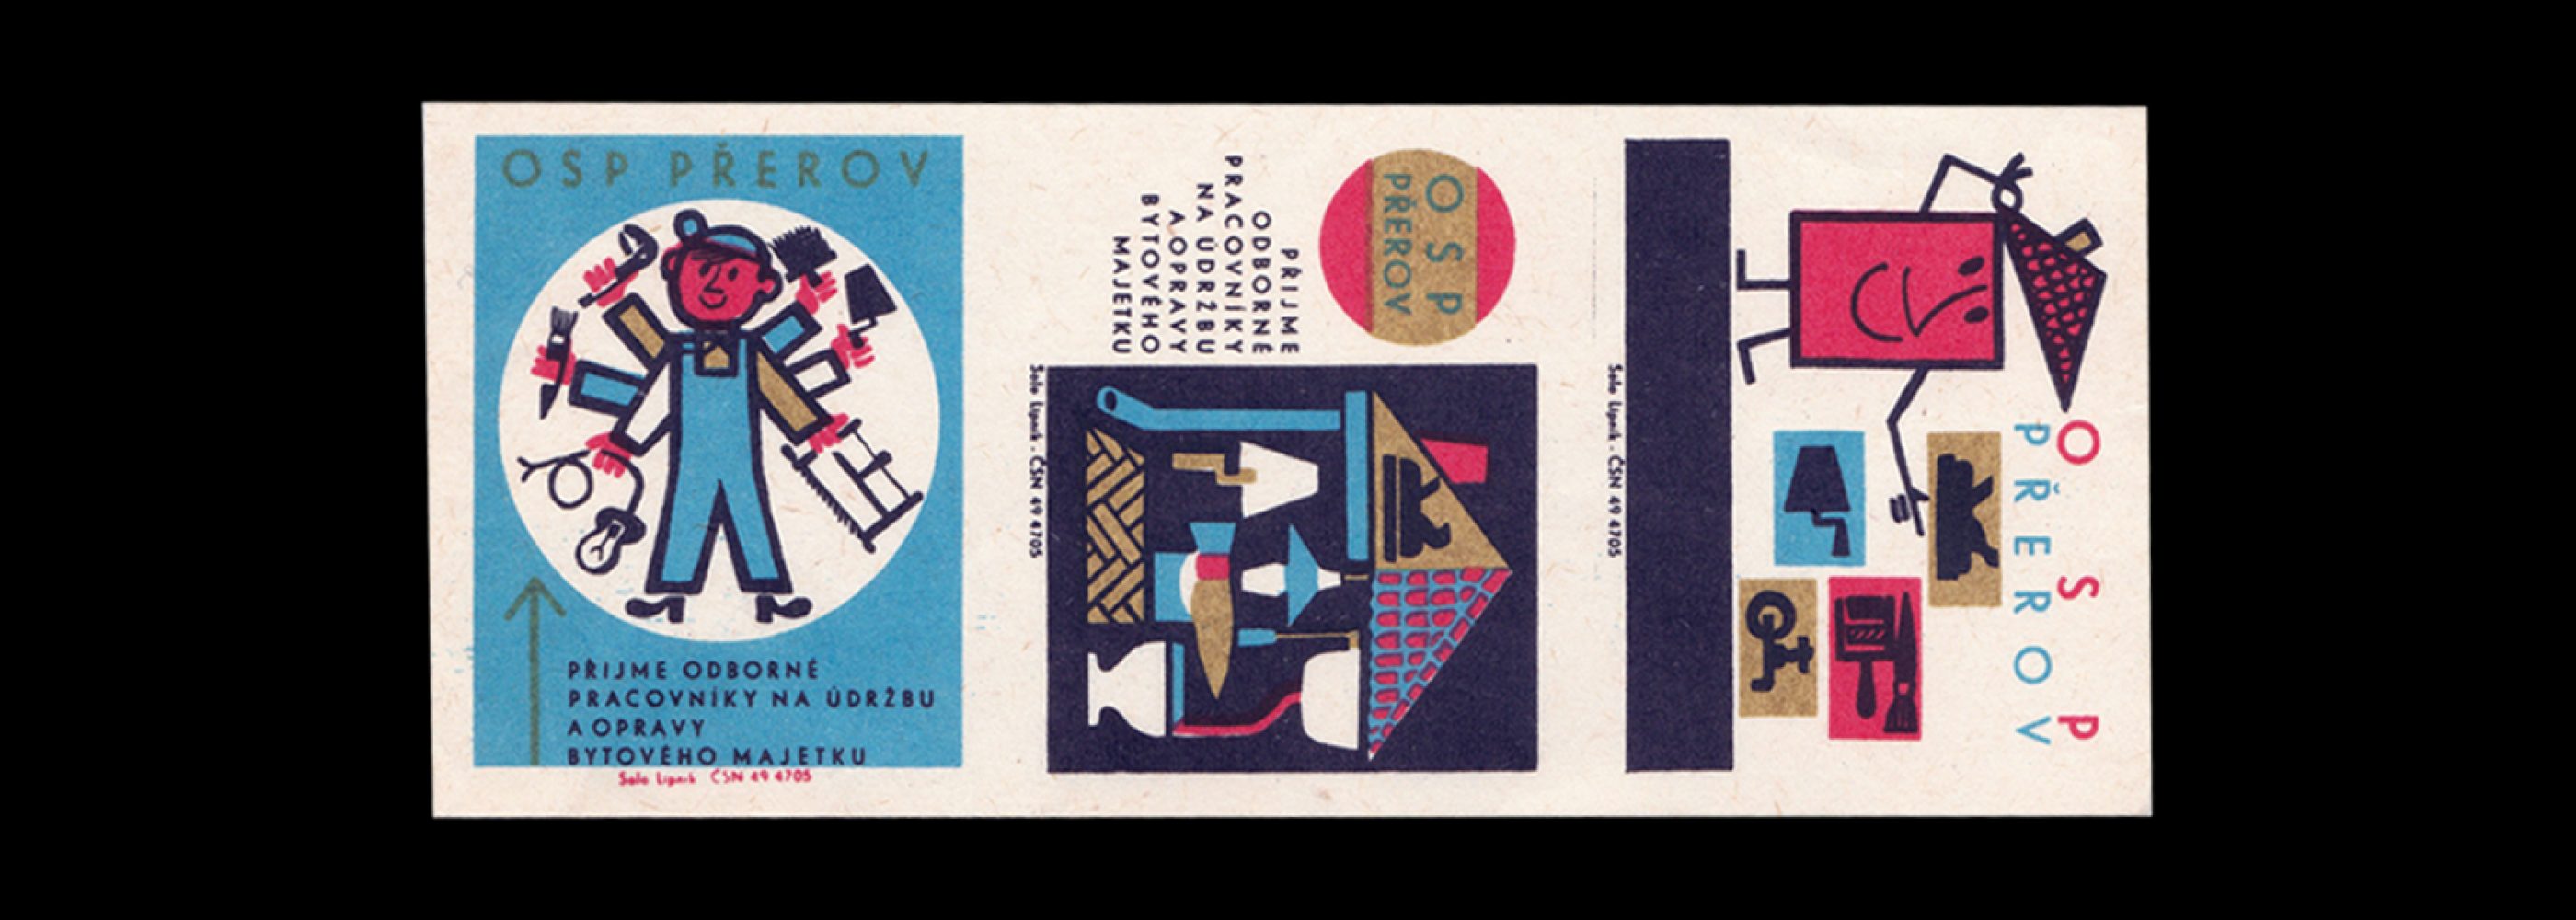 We hire professional workers for healthy housing, Czechoslovakian 1960s Matchbox labels